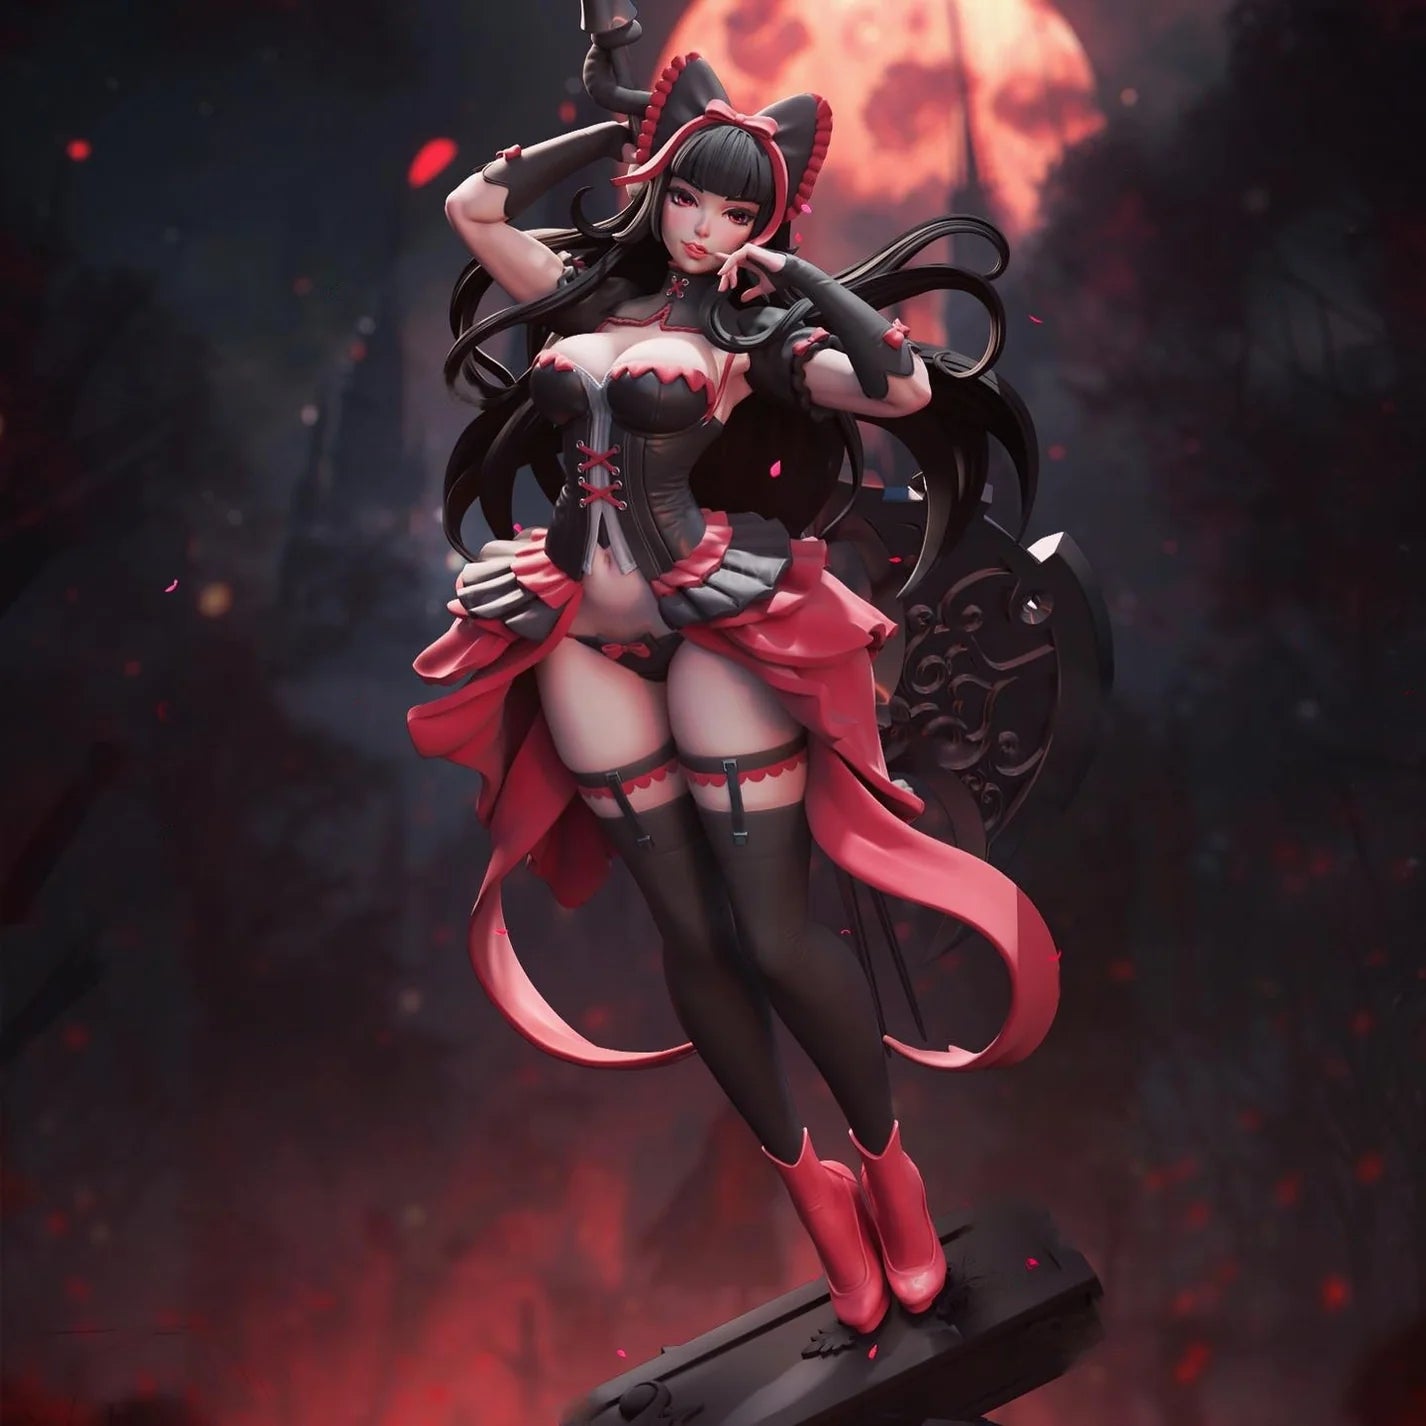 Rory Mercury STL Fichier Impression 3D Conception Anime Character Gate STL Fichier 0116